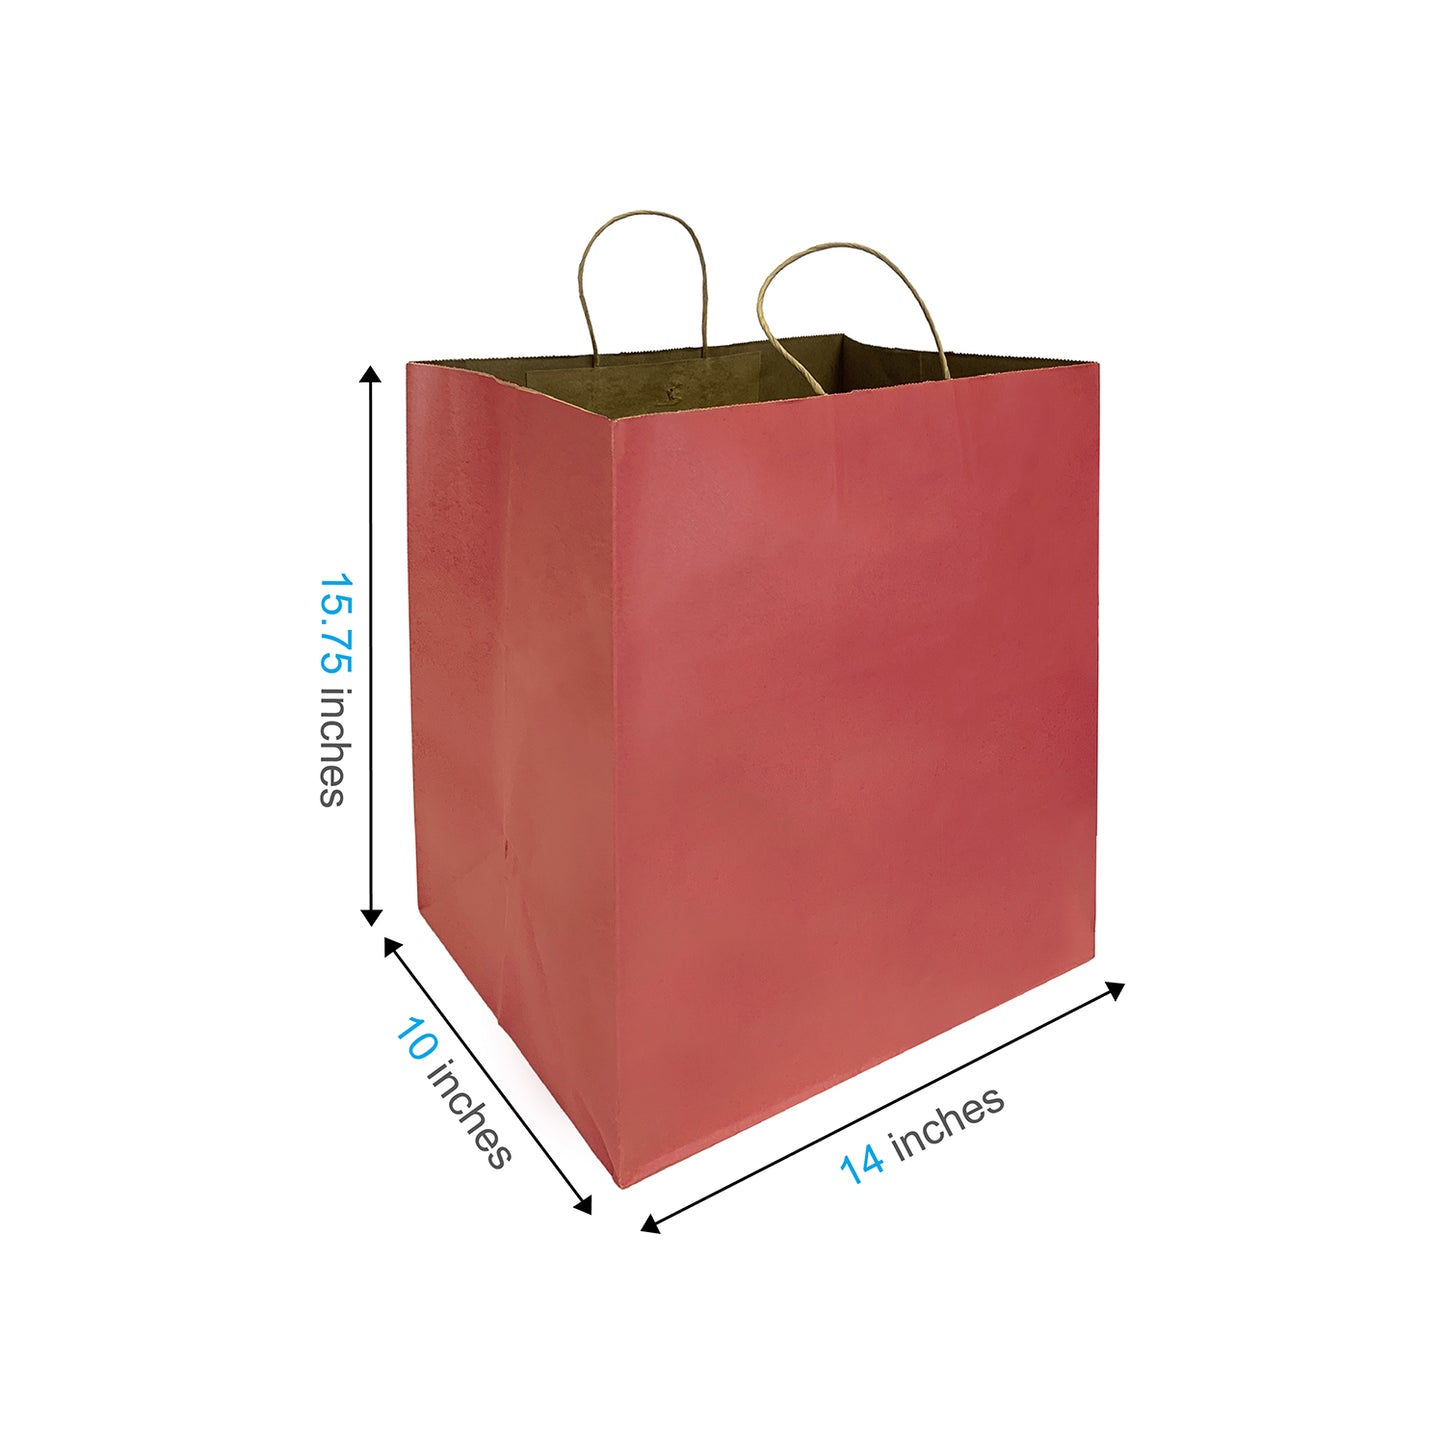 150 Pcs, Super Royal, 14x10x15.75 inches, Burgundy Kraft Paper Bags, with Twisted Handle